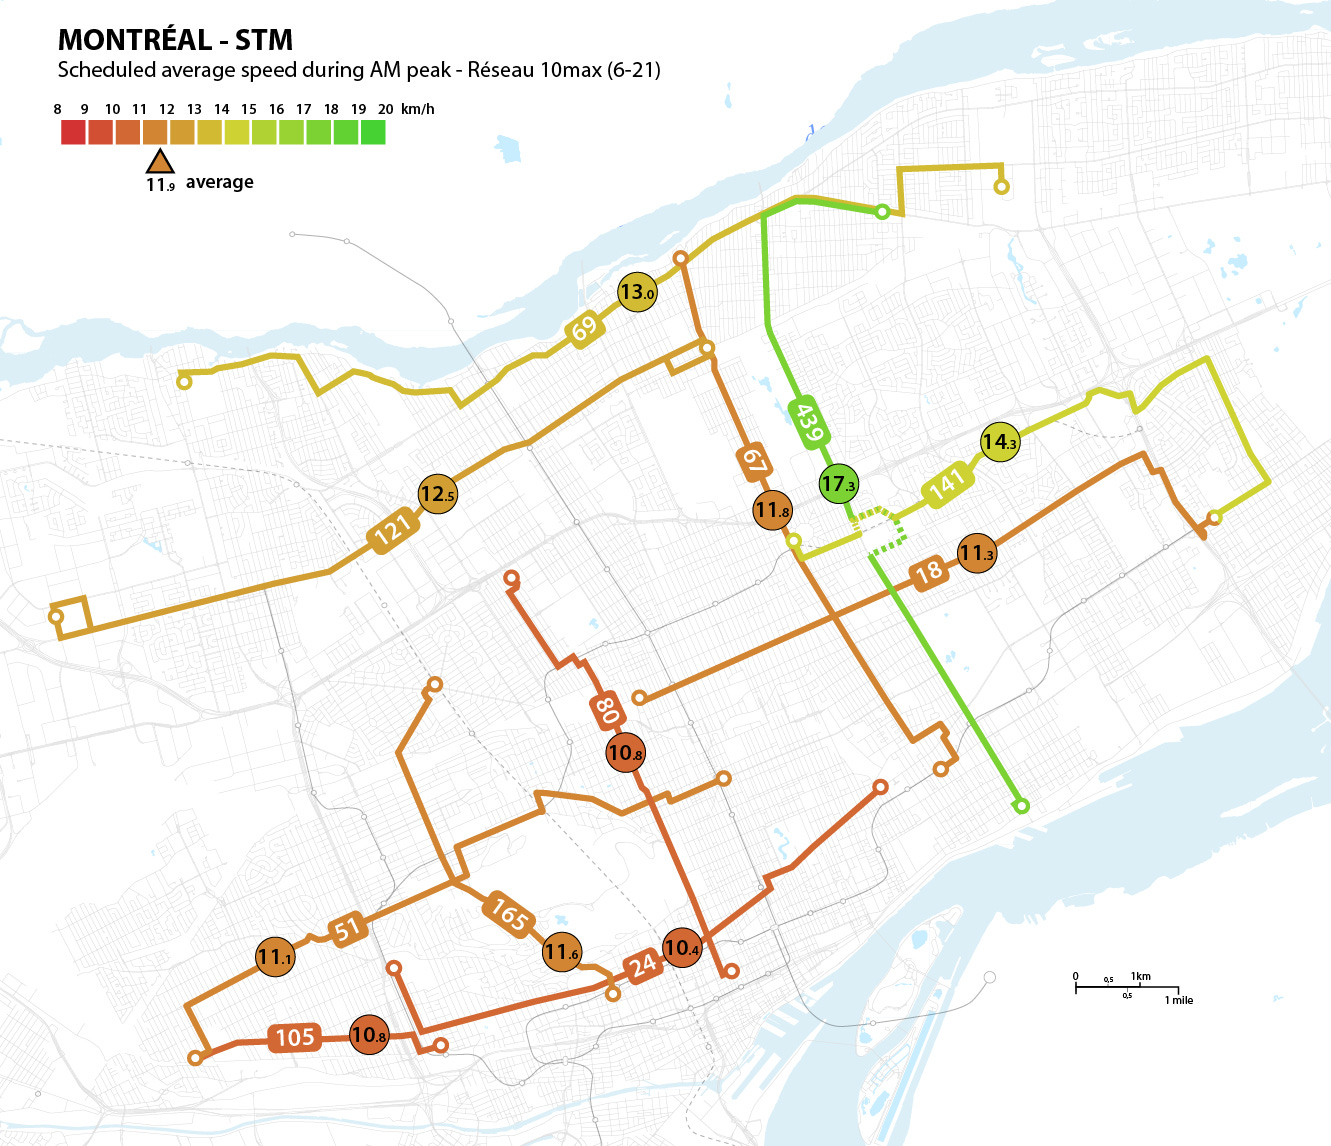 map of Montréal frequent bus network indicating the average scheduled speed for each line during AM peak